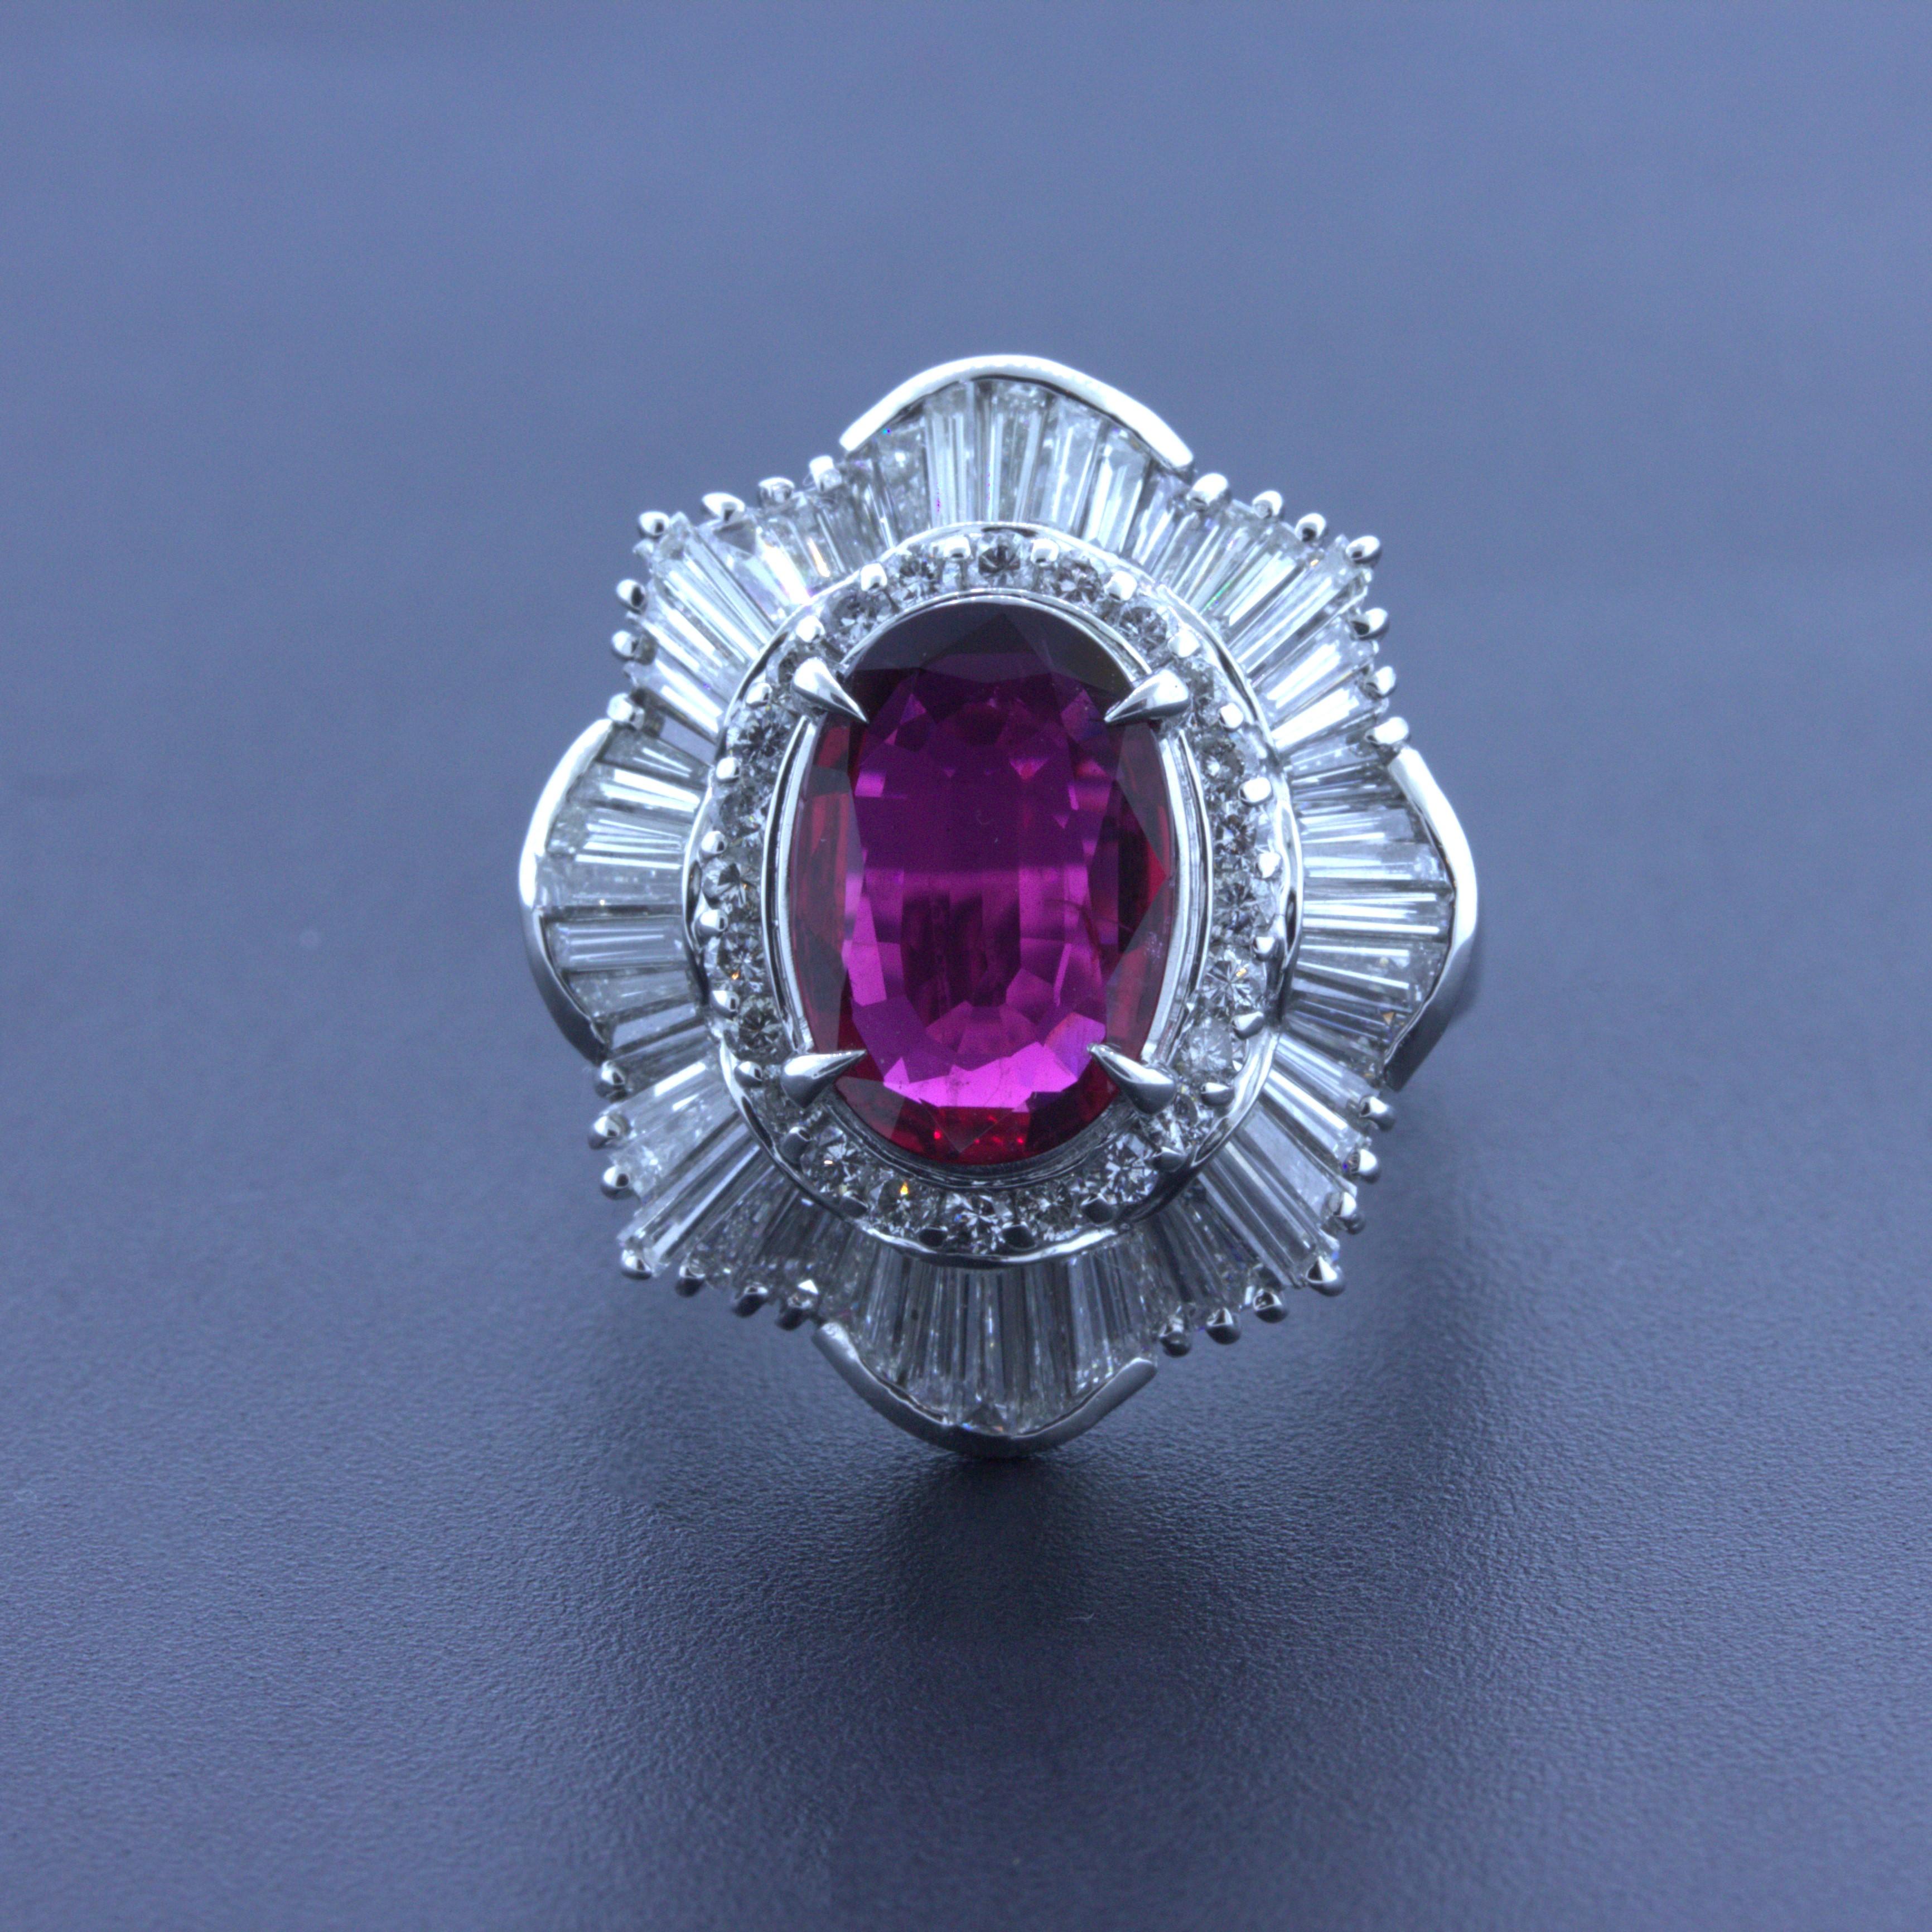 A chic and classy platinum ring featuring a fine oval-shape natural ruby. It weighs 2.51 carats and has a rich intense pure red color. Adding to that, the ruby is extremely clean allowing it to shine brightly and brilliantly. It is complemented by